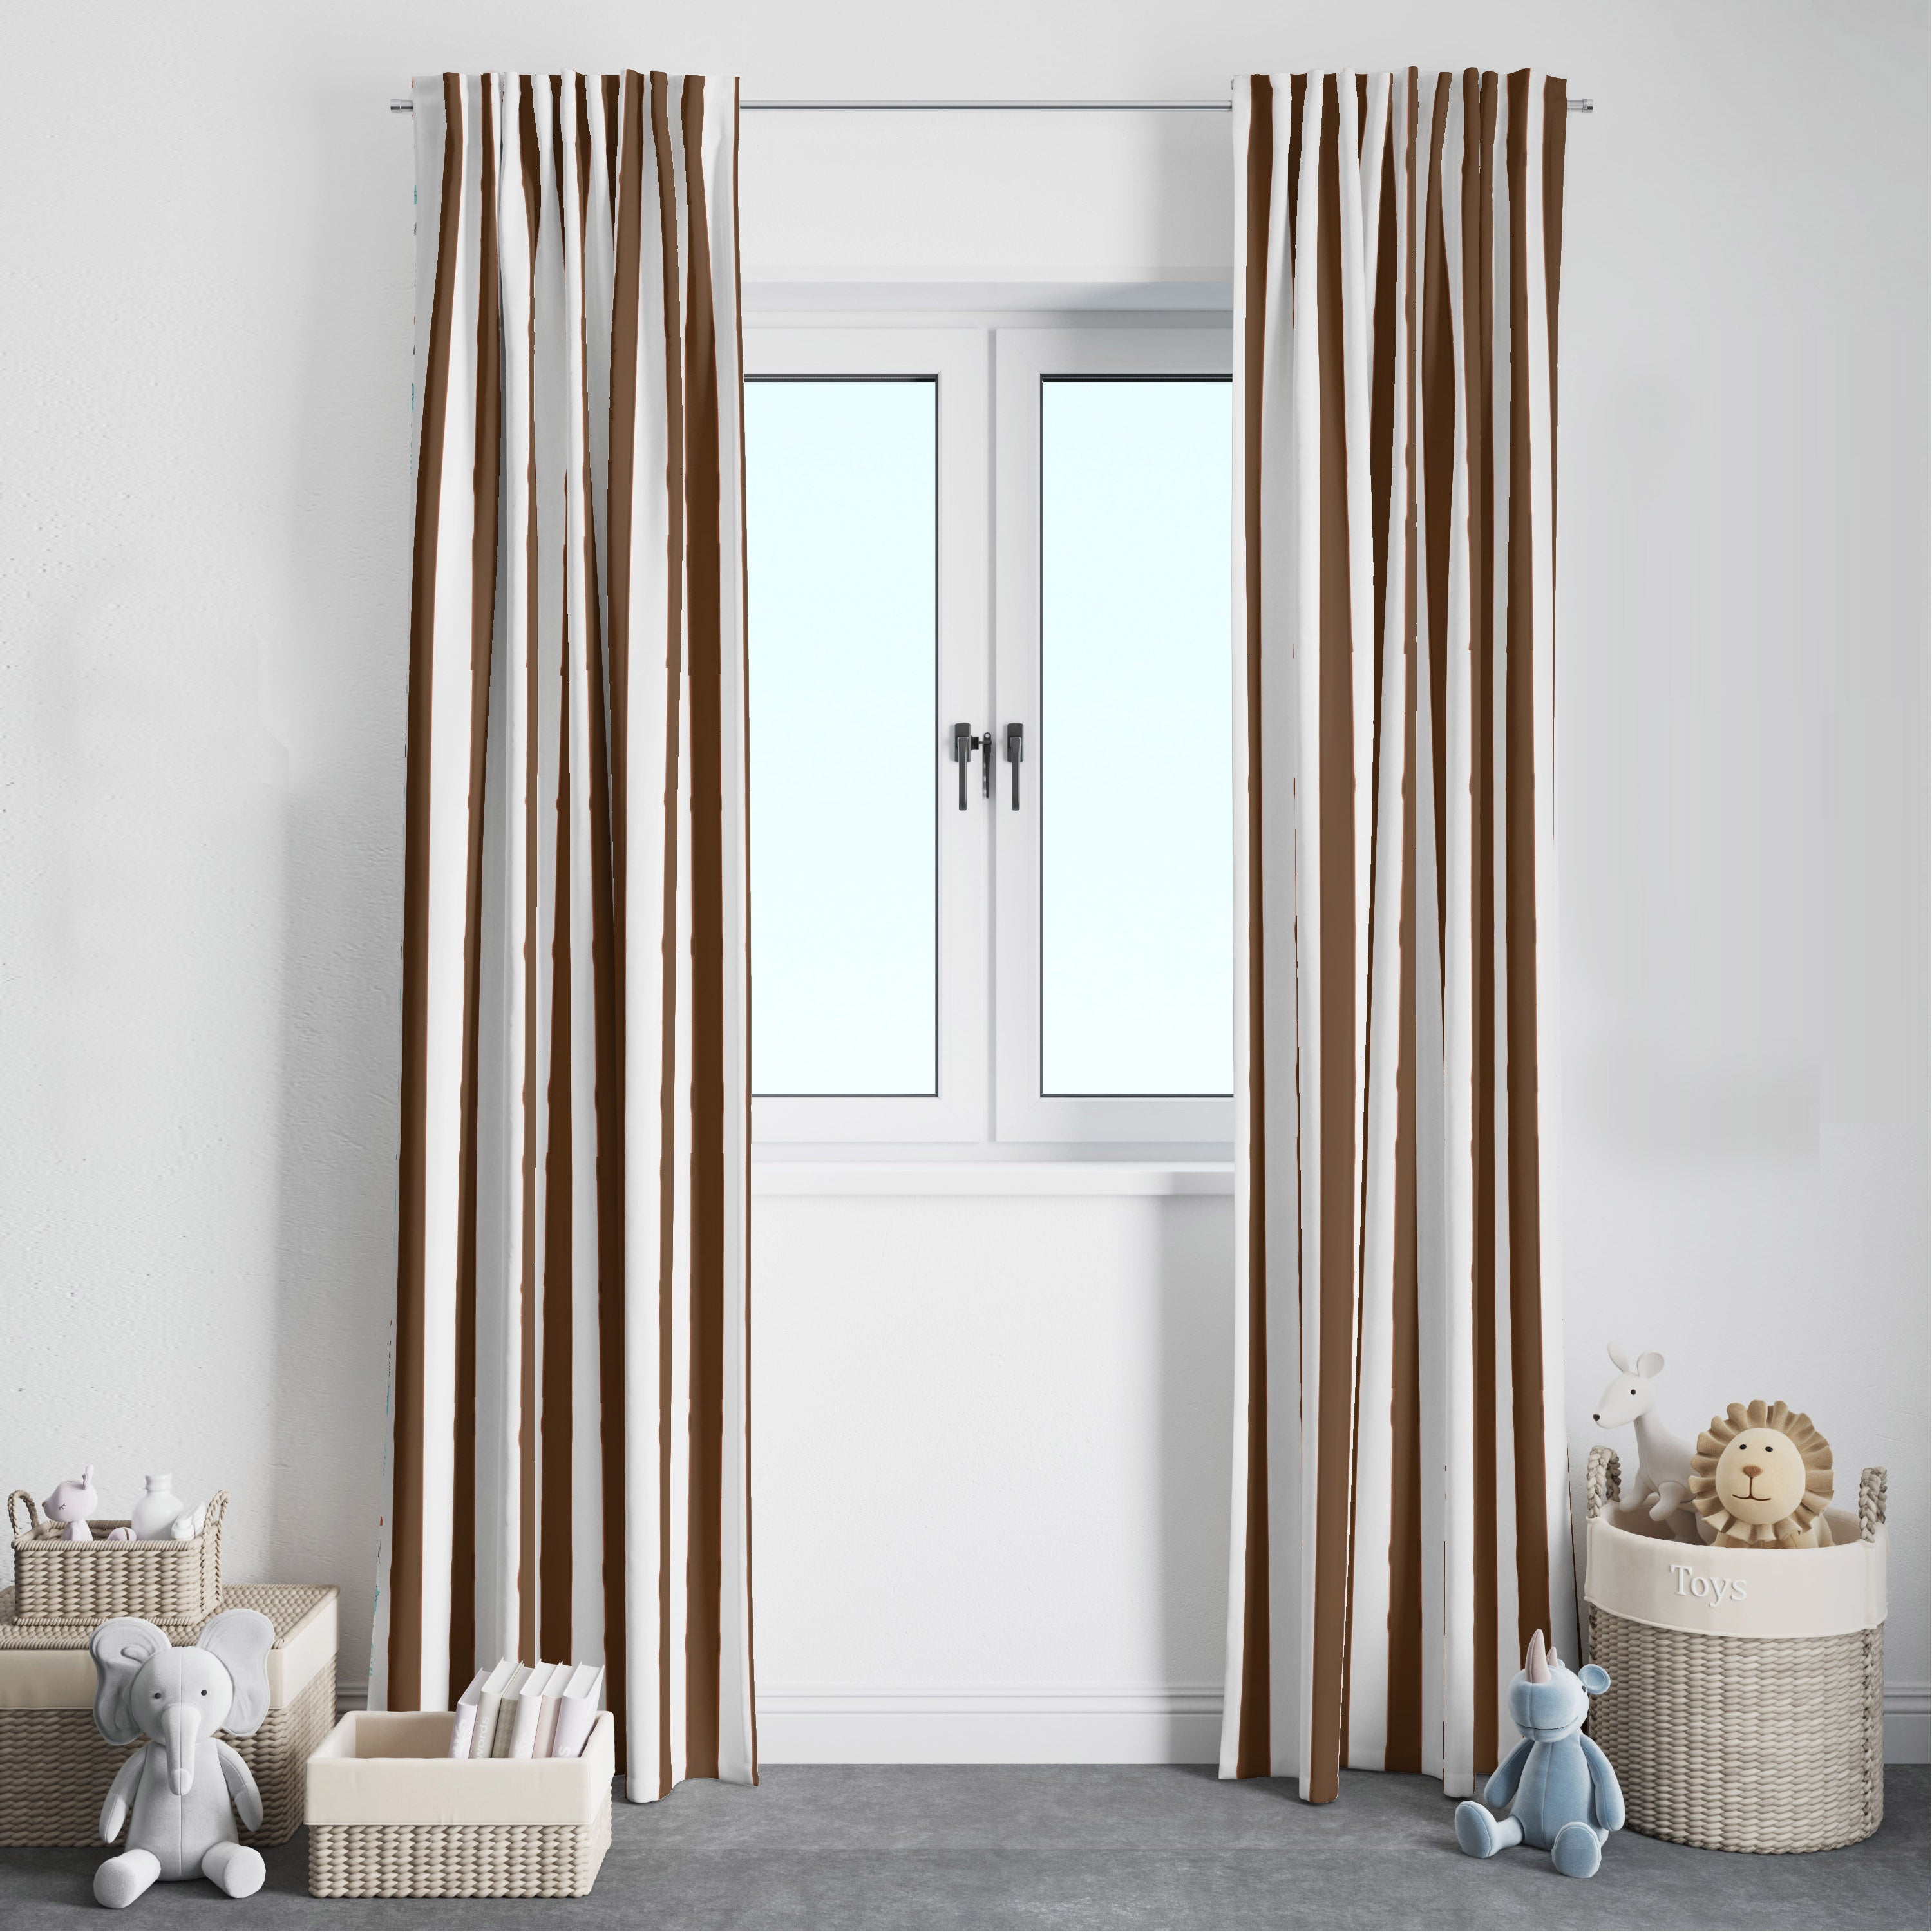 Bacati - Single Light Filtering Curtain Panel Stripes Brown/White - image 2 of 5